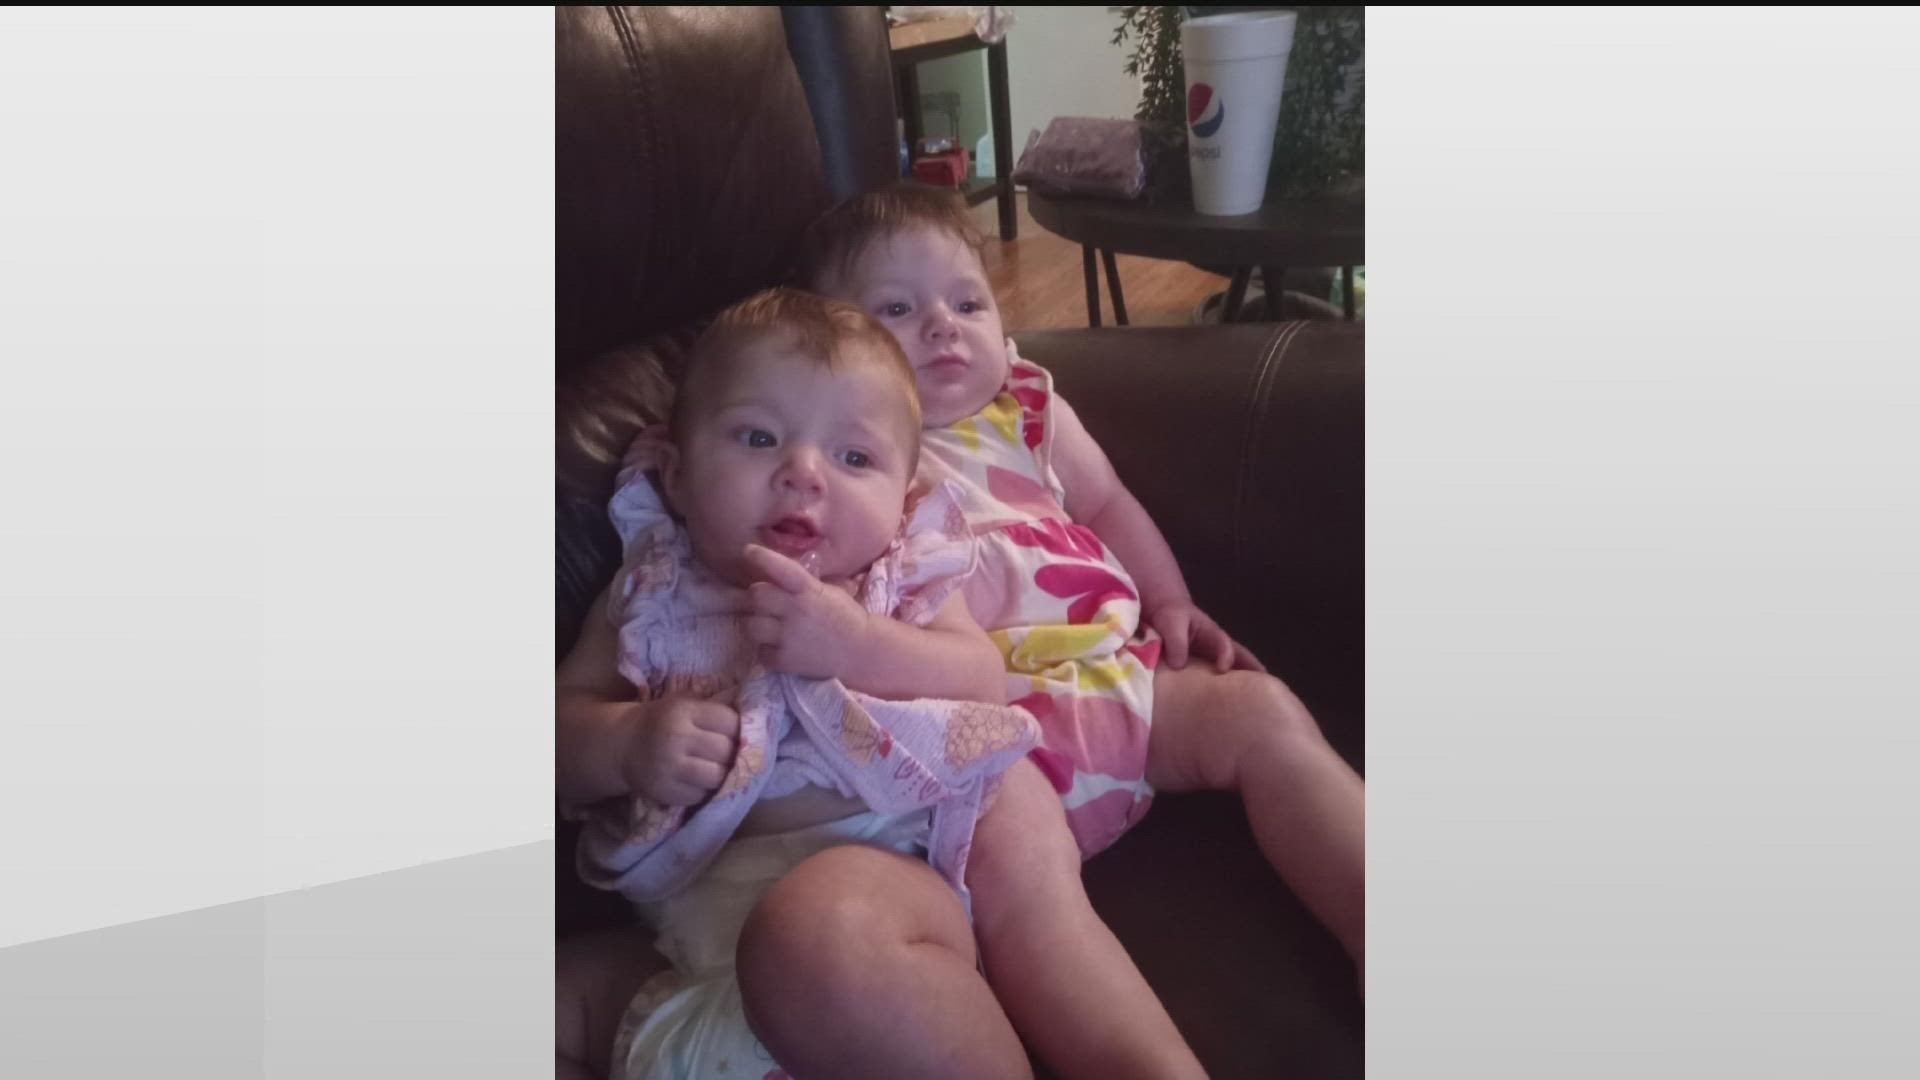 A grandmother is devastated after the loss of her twin grandchildren, killed during a house fire in Pike County, just a day after their first birthday.